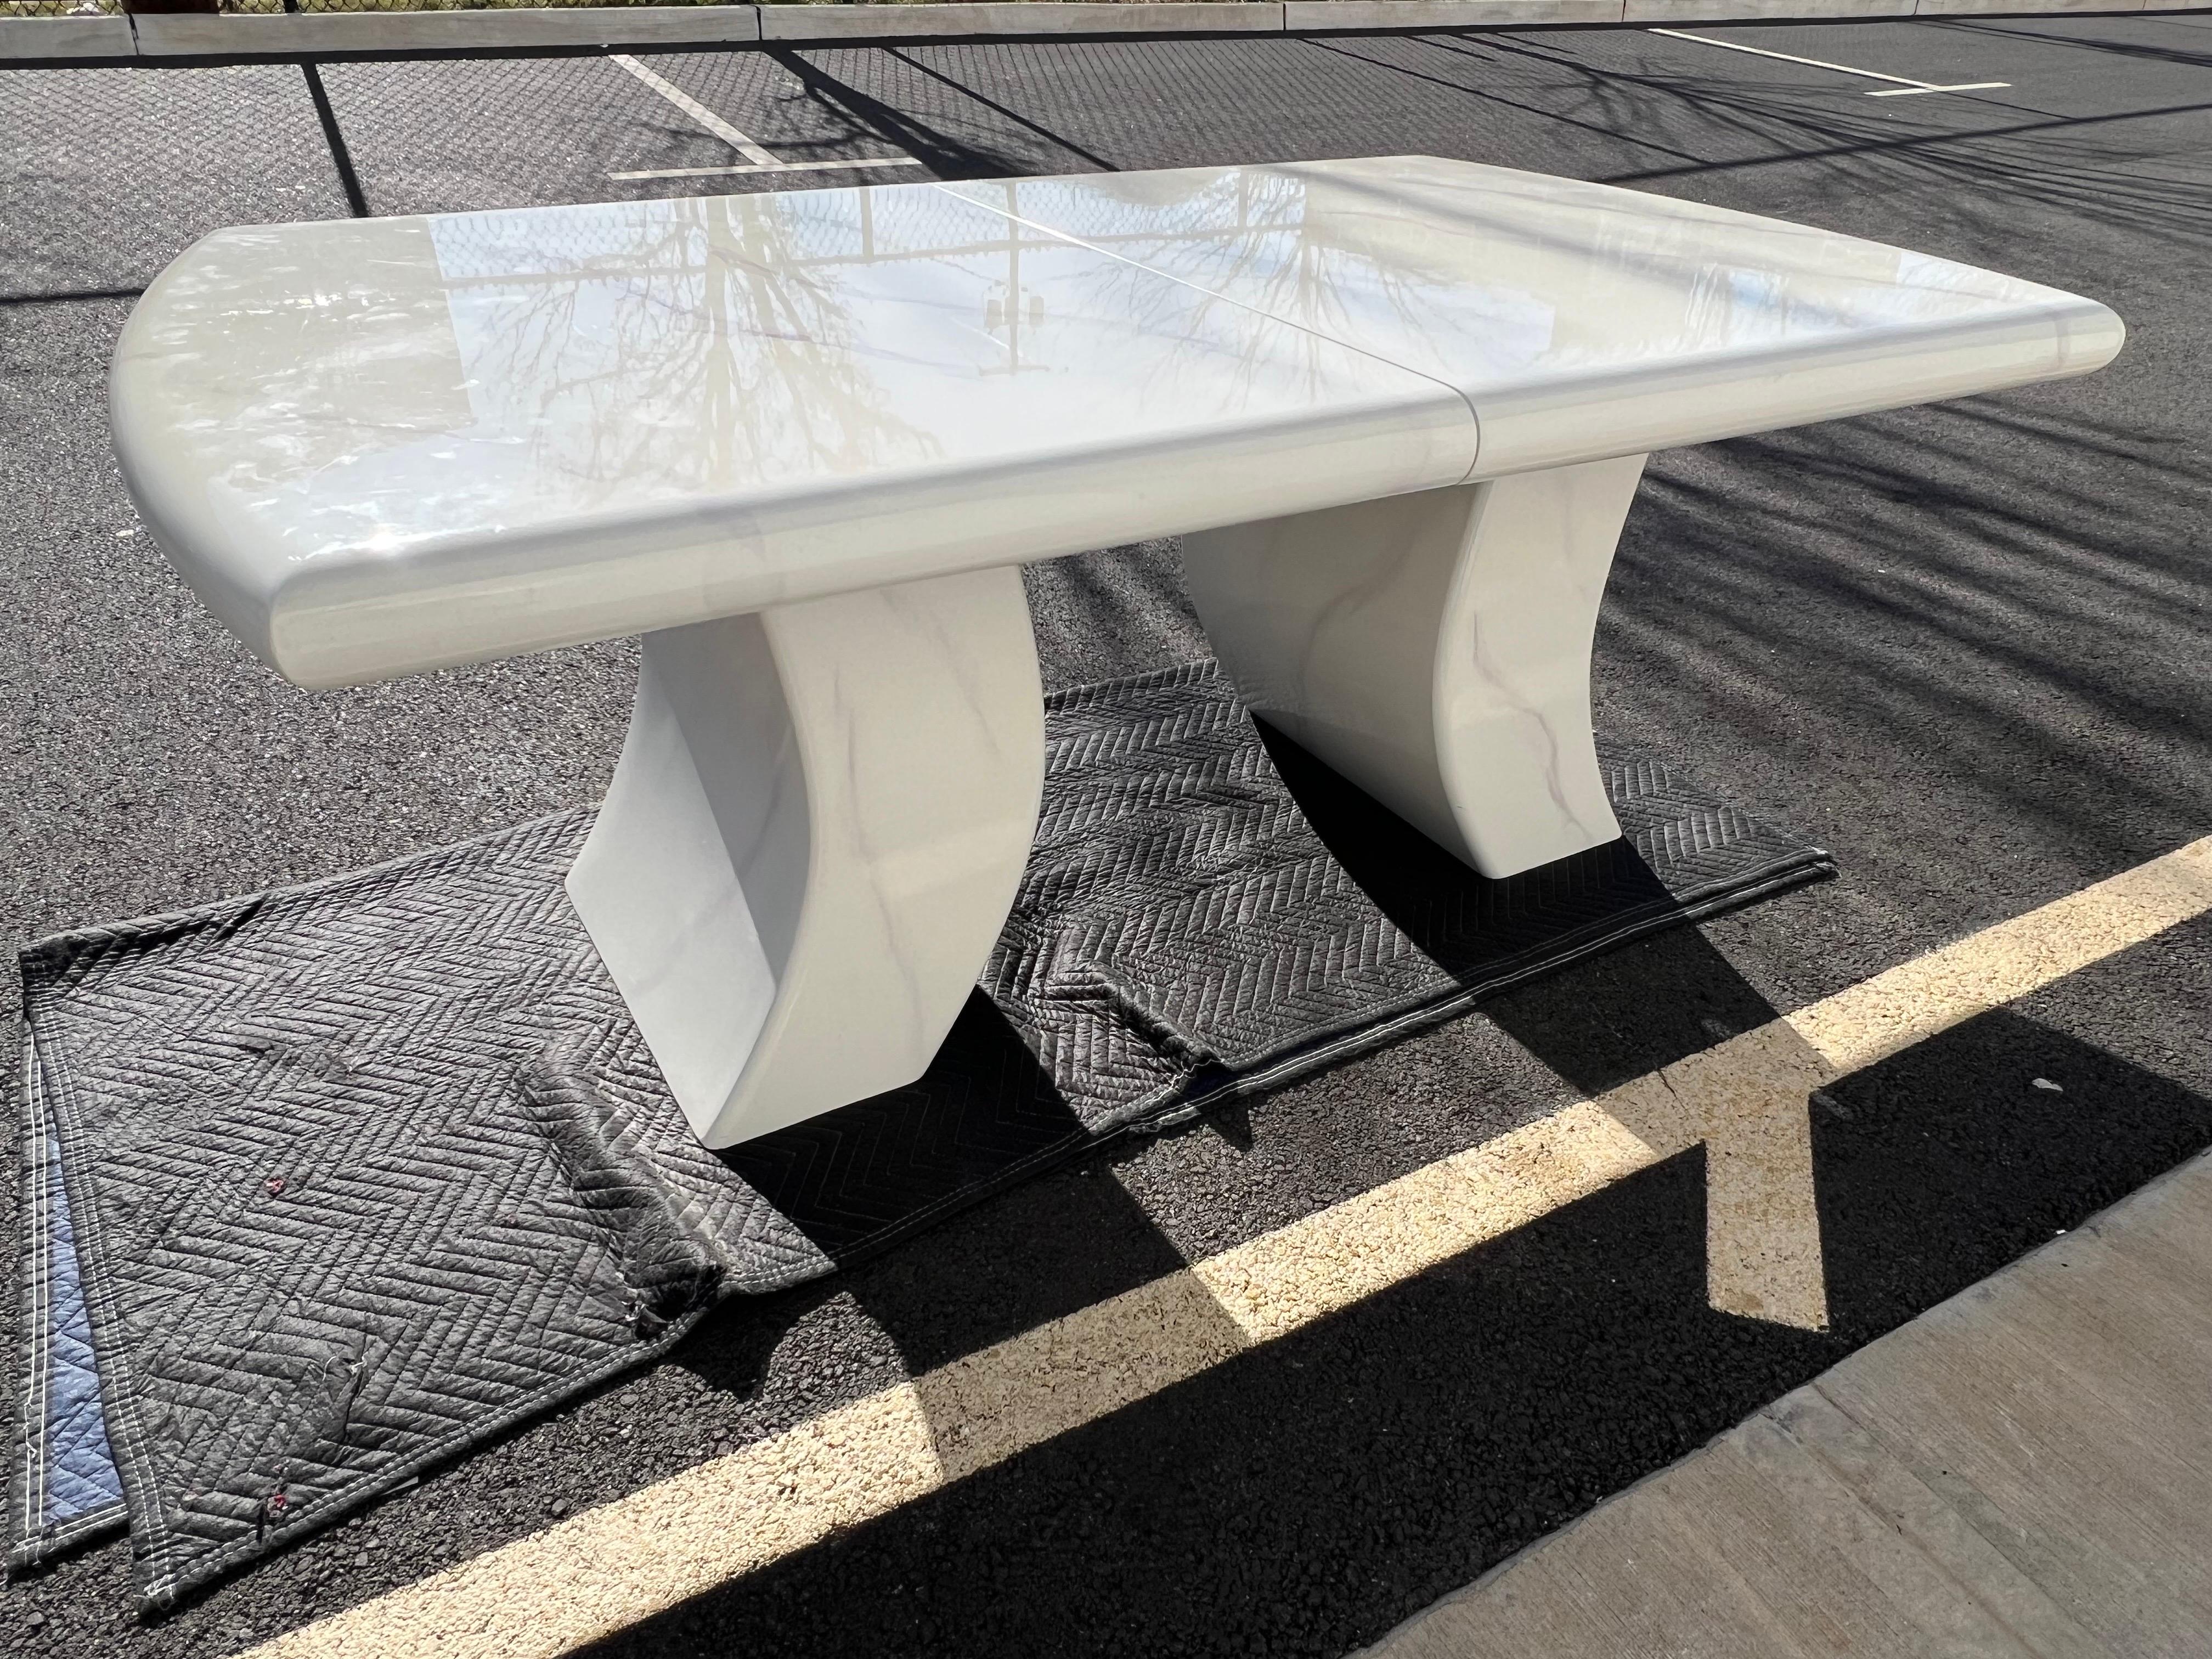 Faux purple marble white lacquer dining table in the style of Karl Springer.

Come with two curvy pedestals for the dining table legs. No major defects. Minor dents or scratches, please check all of the photos for the condition.